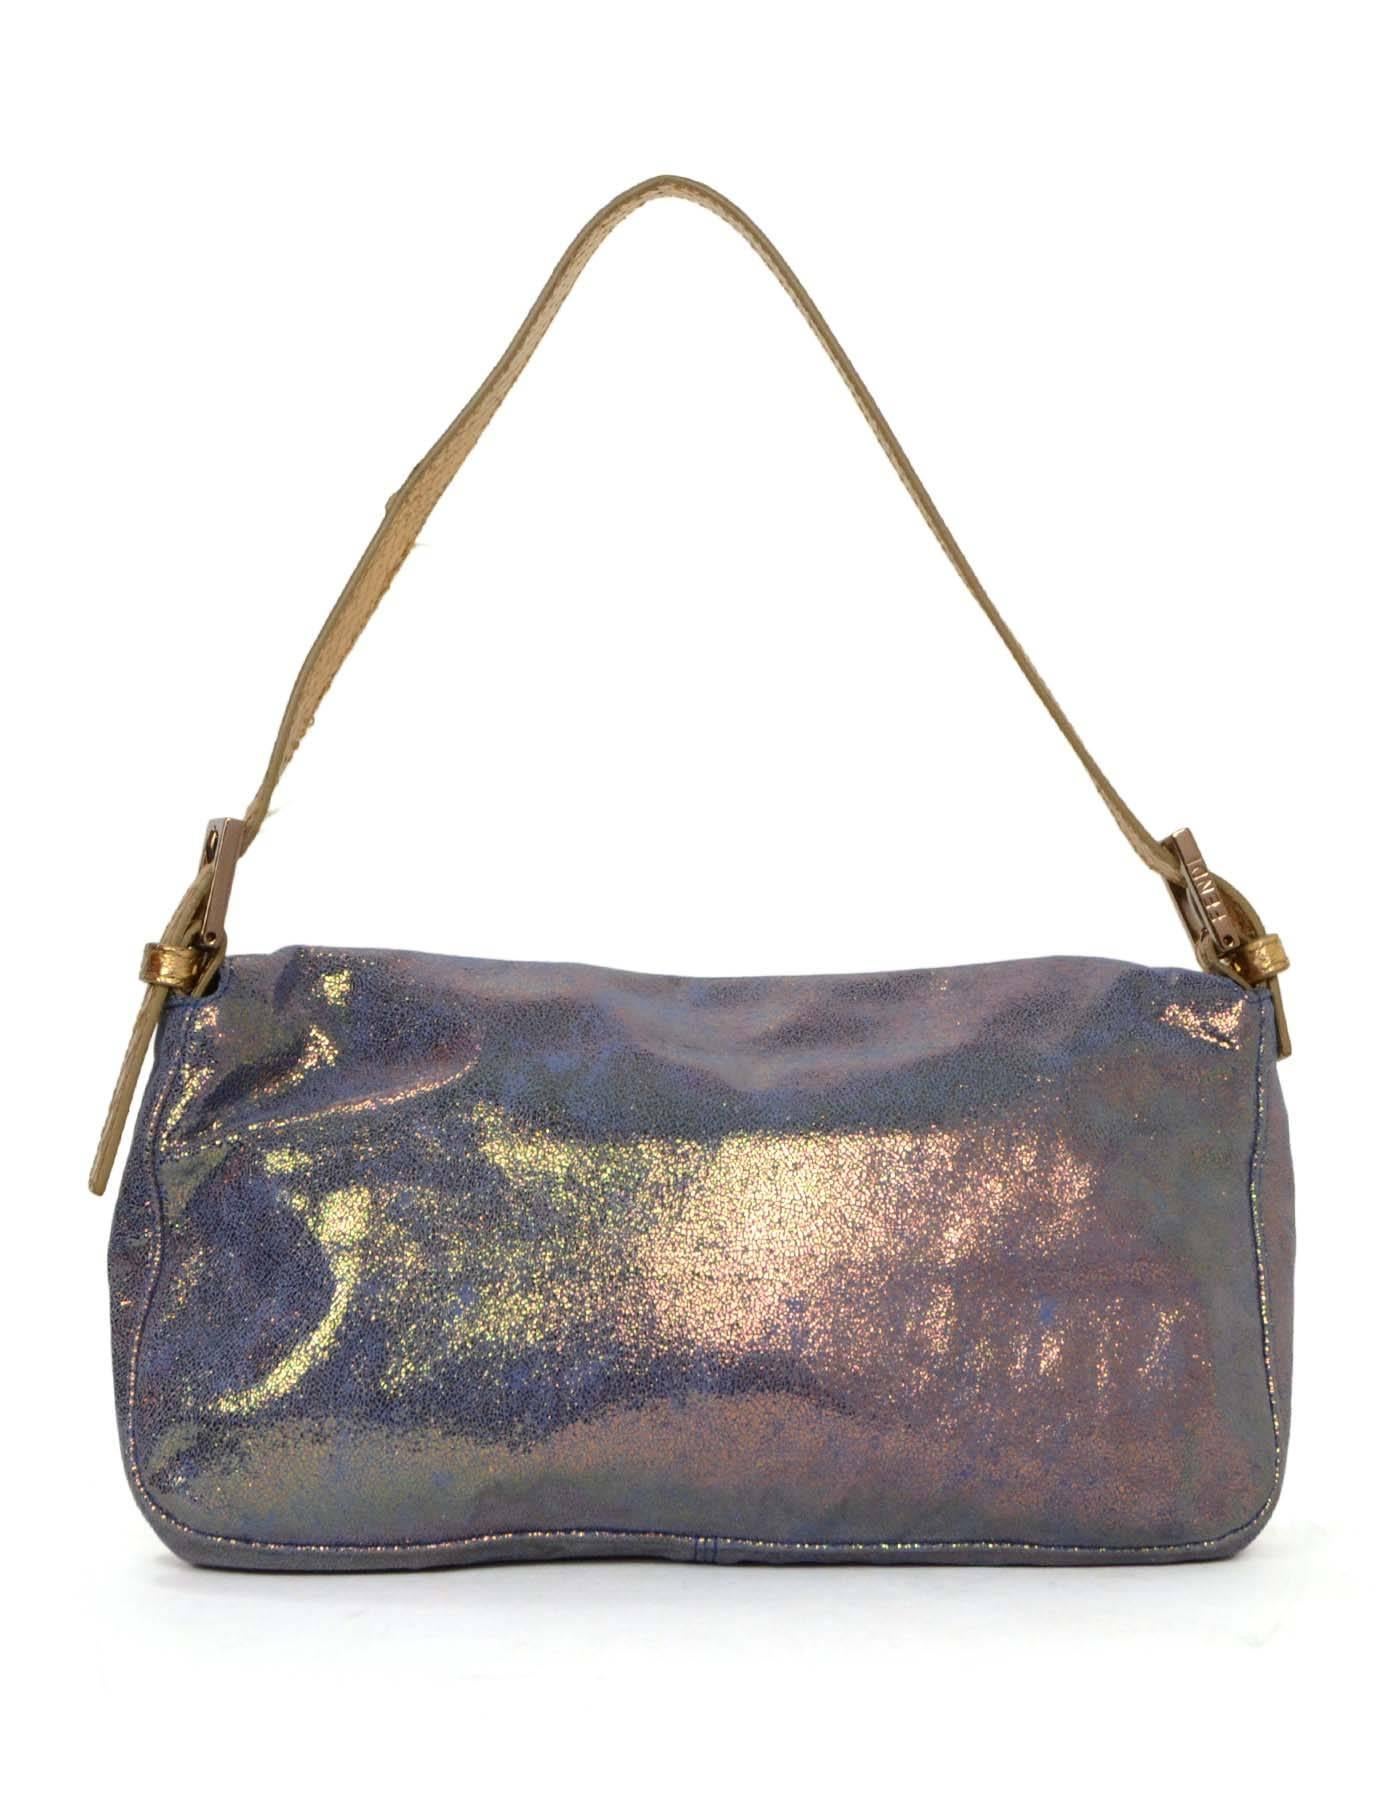 Fendi Purple Iridescent Sueded Leather Baguette 
Features gold python trim and logo buckle with marbleized background

    Made In: Italy
    Color: Iridescent purple and gold
    Hardware: Light goldtone
    Materials: Sueded leather and